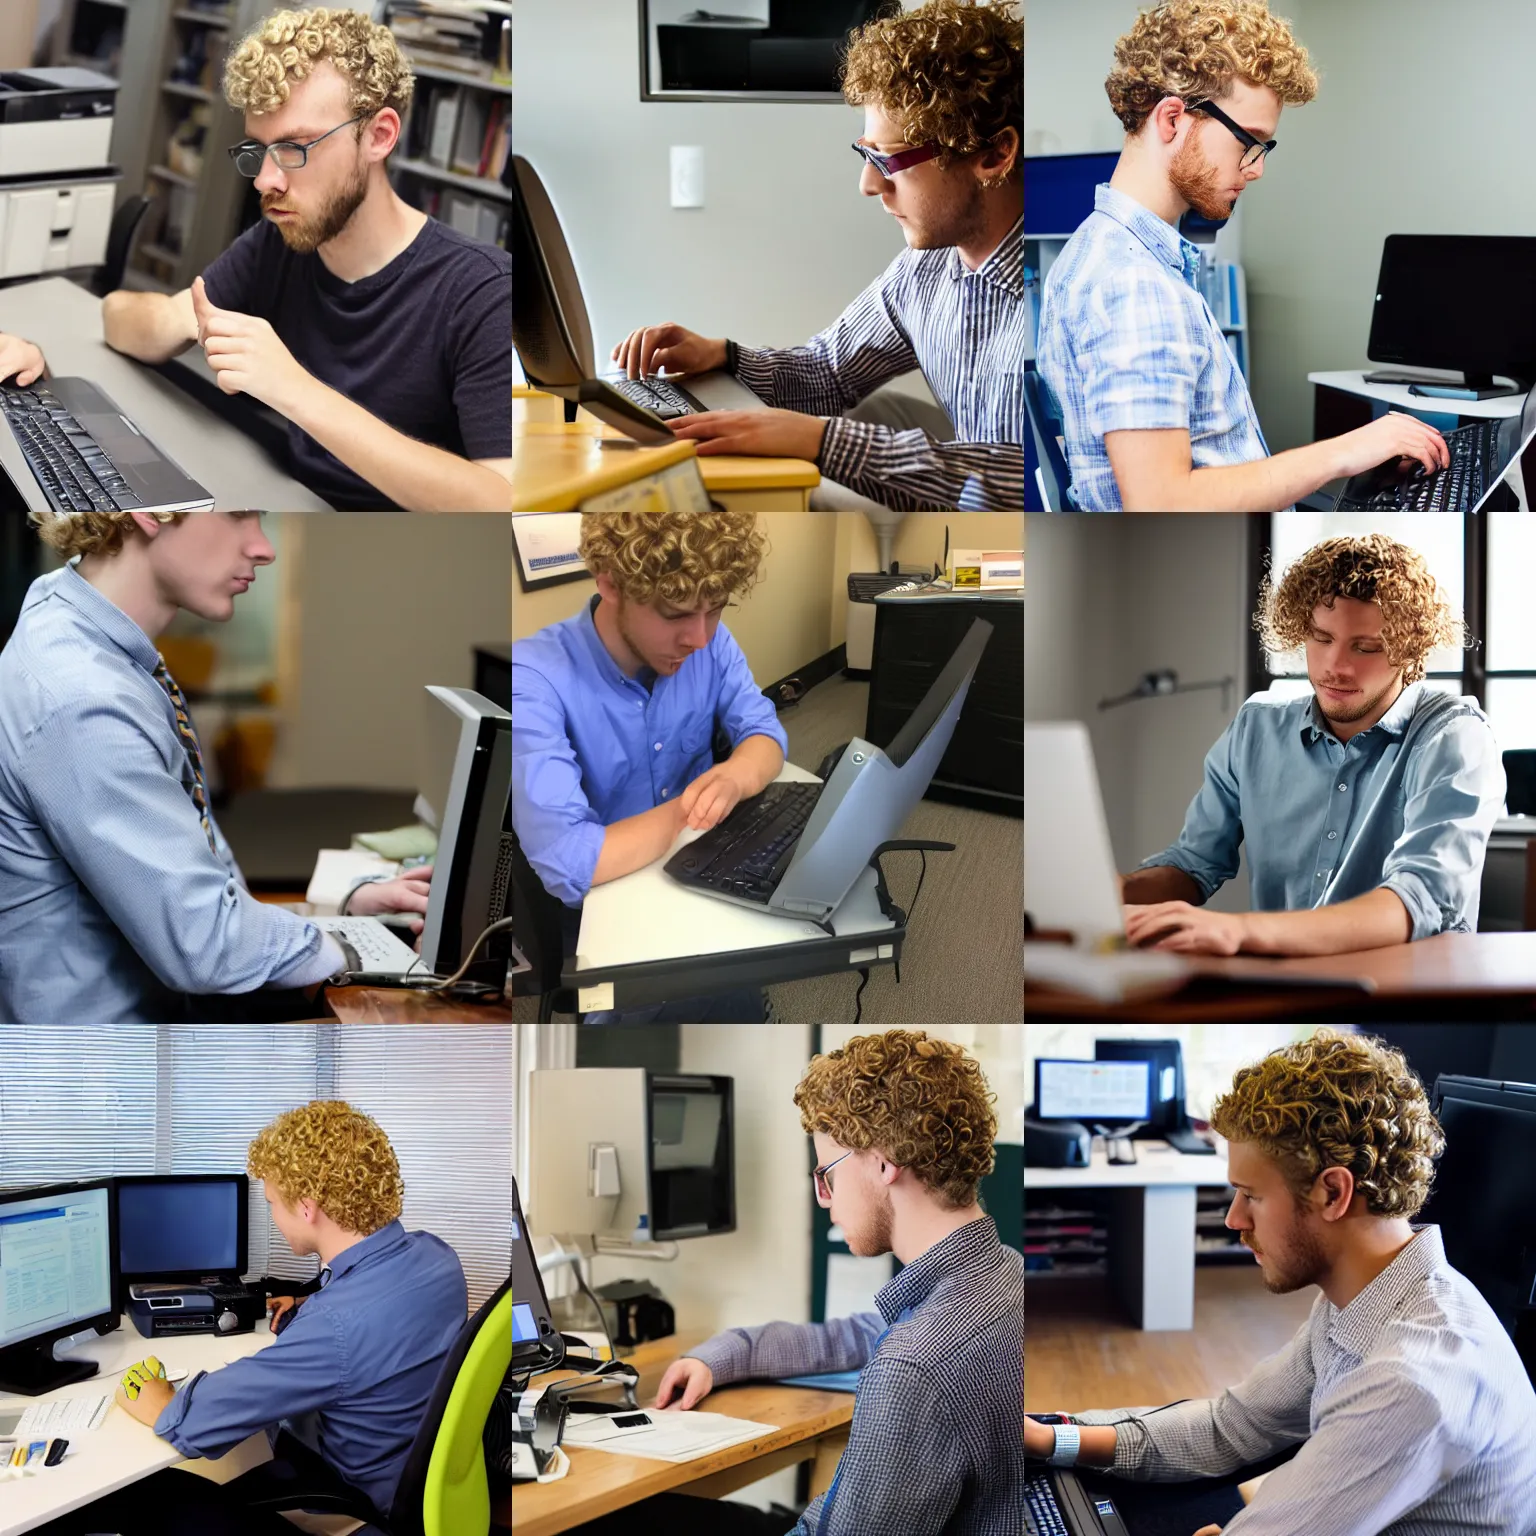 Prompt: a curly blonde haired guy named Jeffrey works diligently on his computer